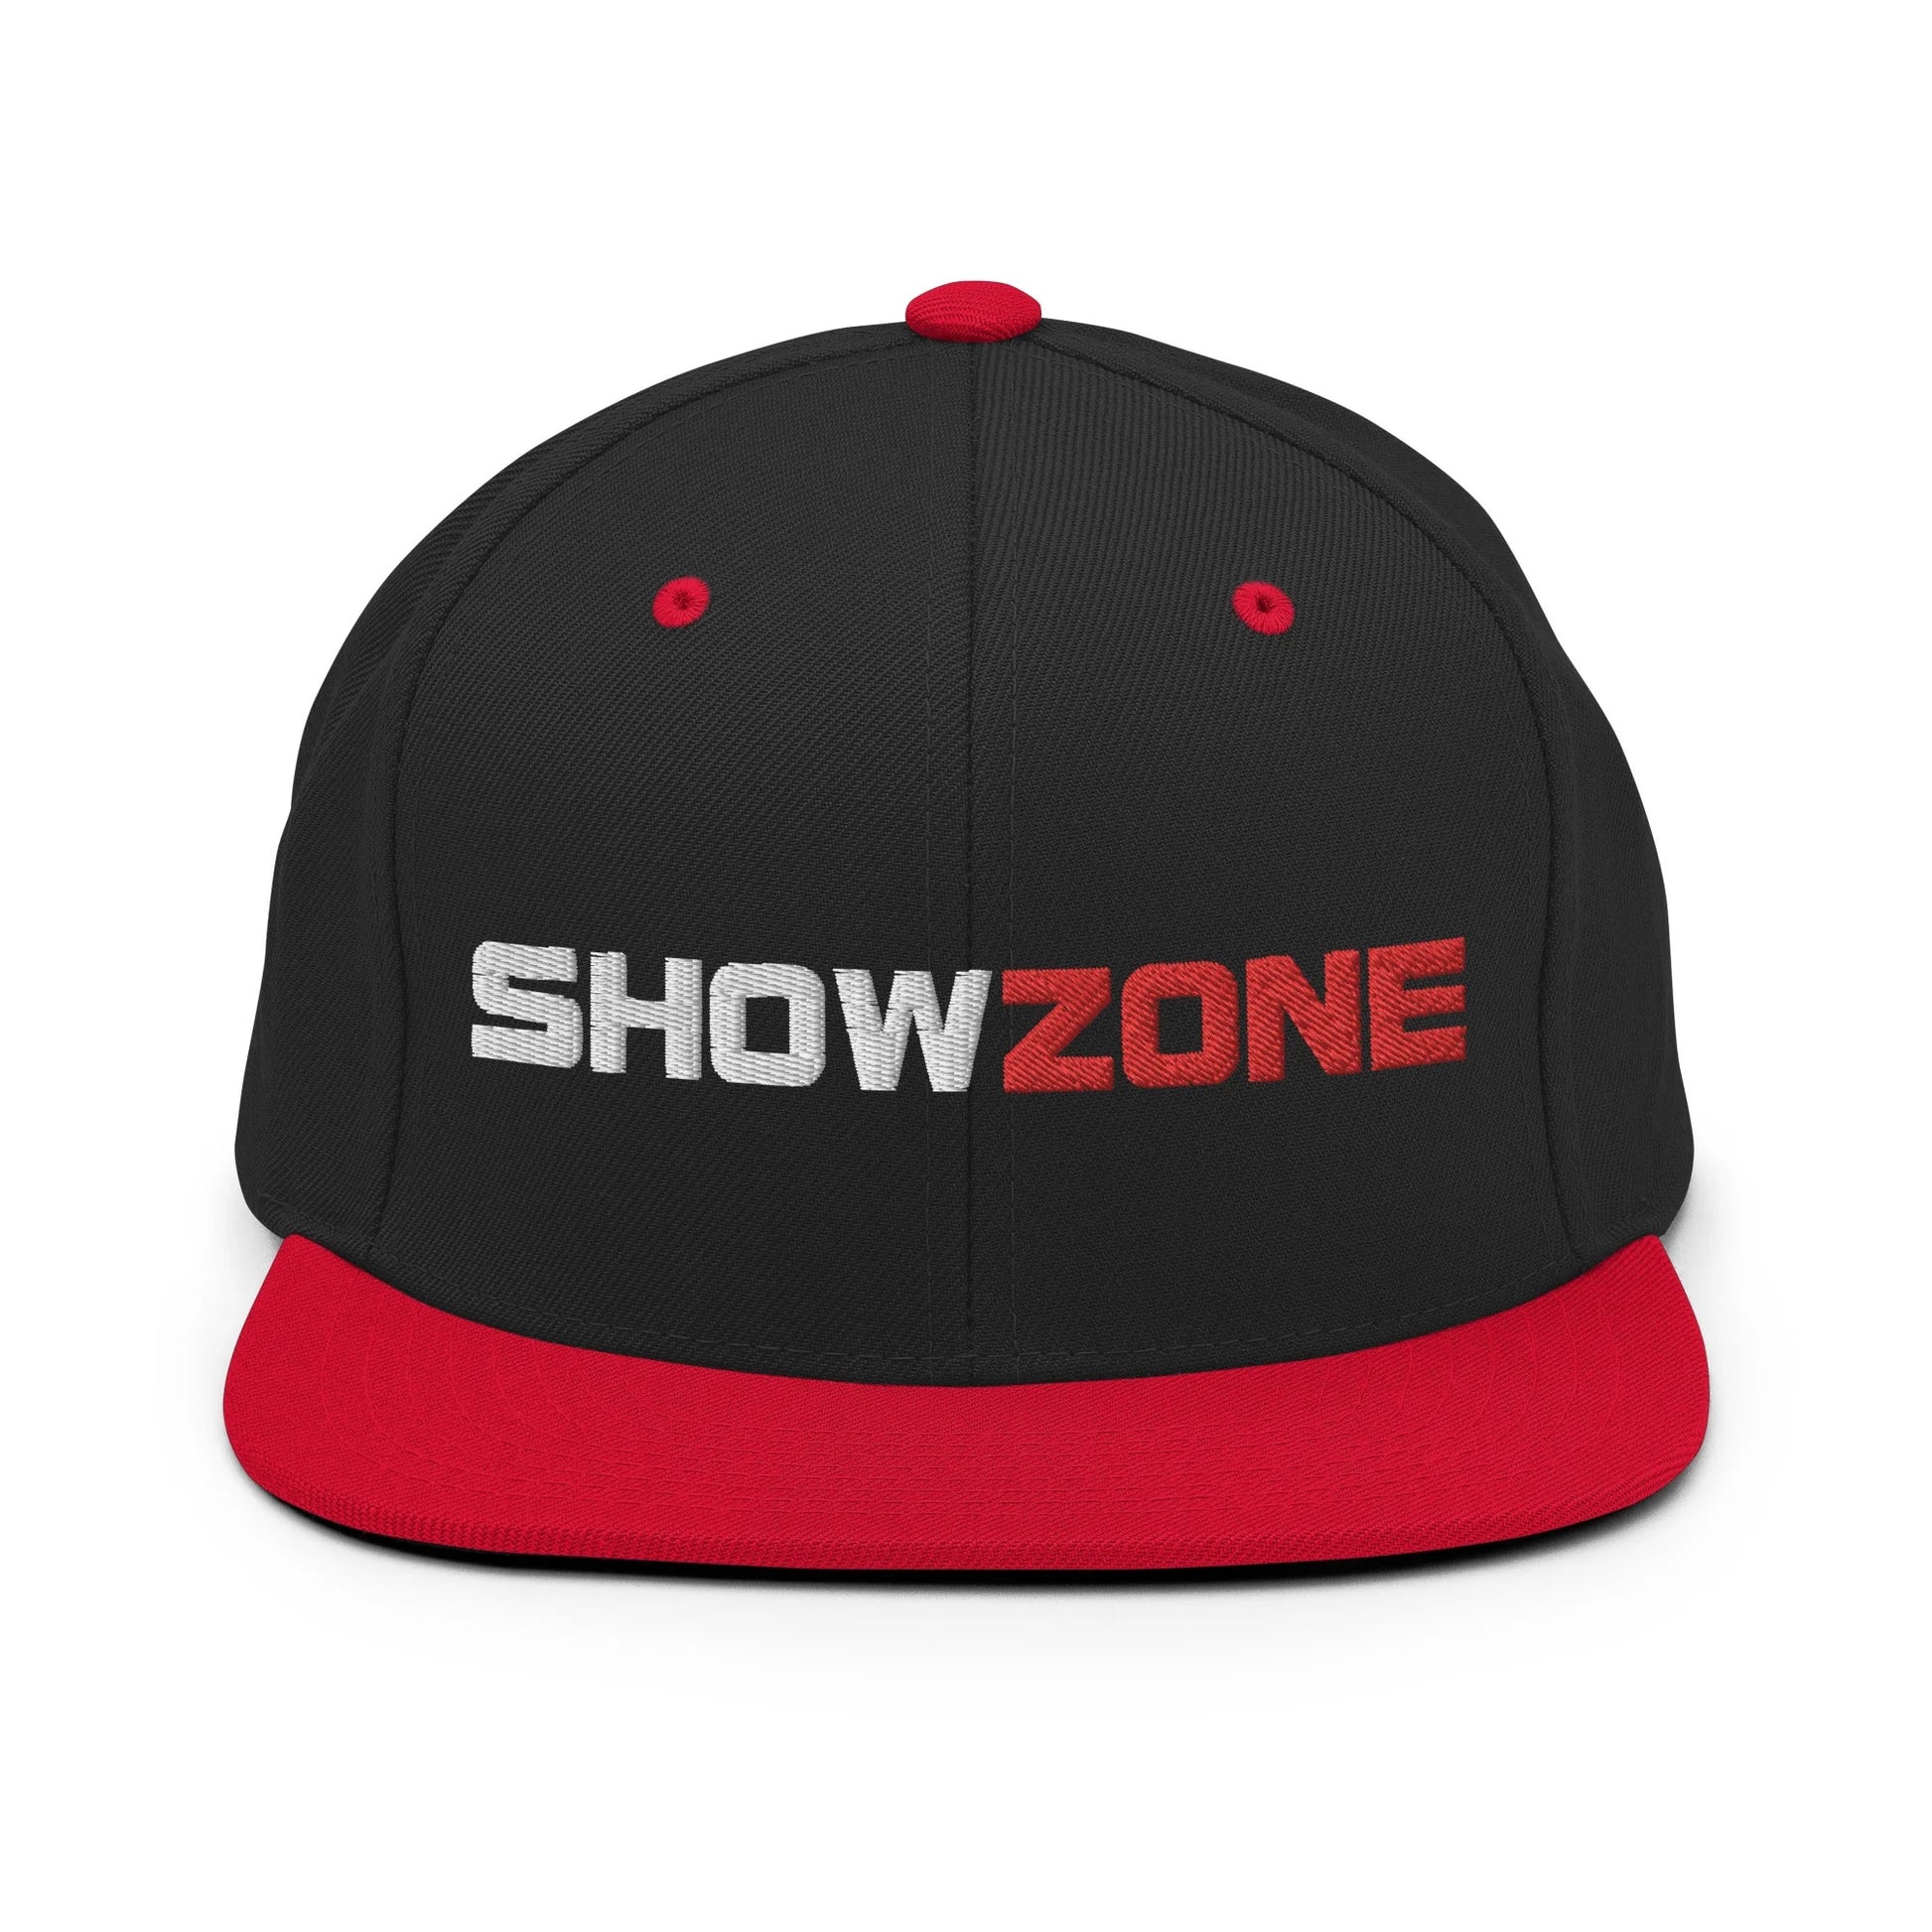 ShowZone snapback hat in black with text logo and red brim accents